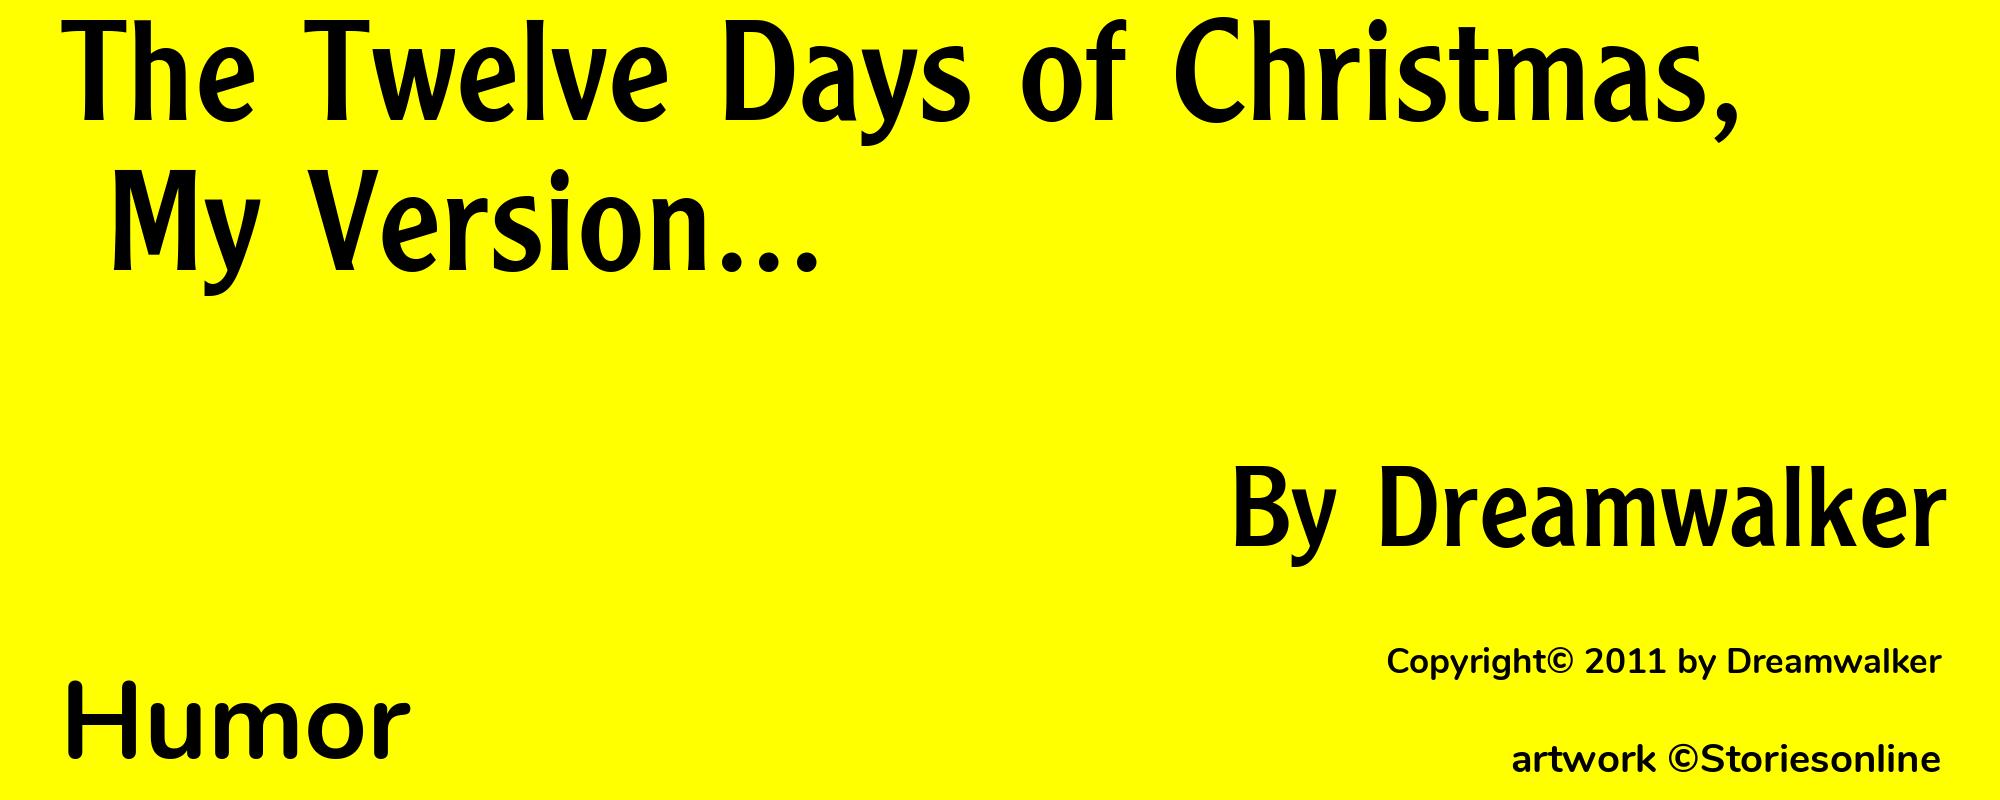 The Twelve Days of Christmas, My Version... - Cover